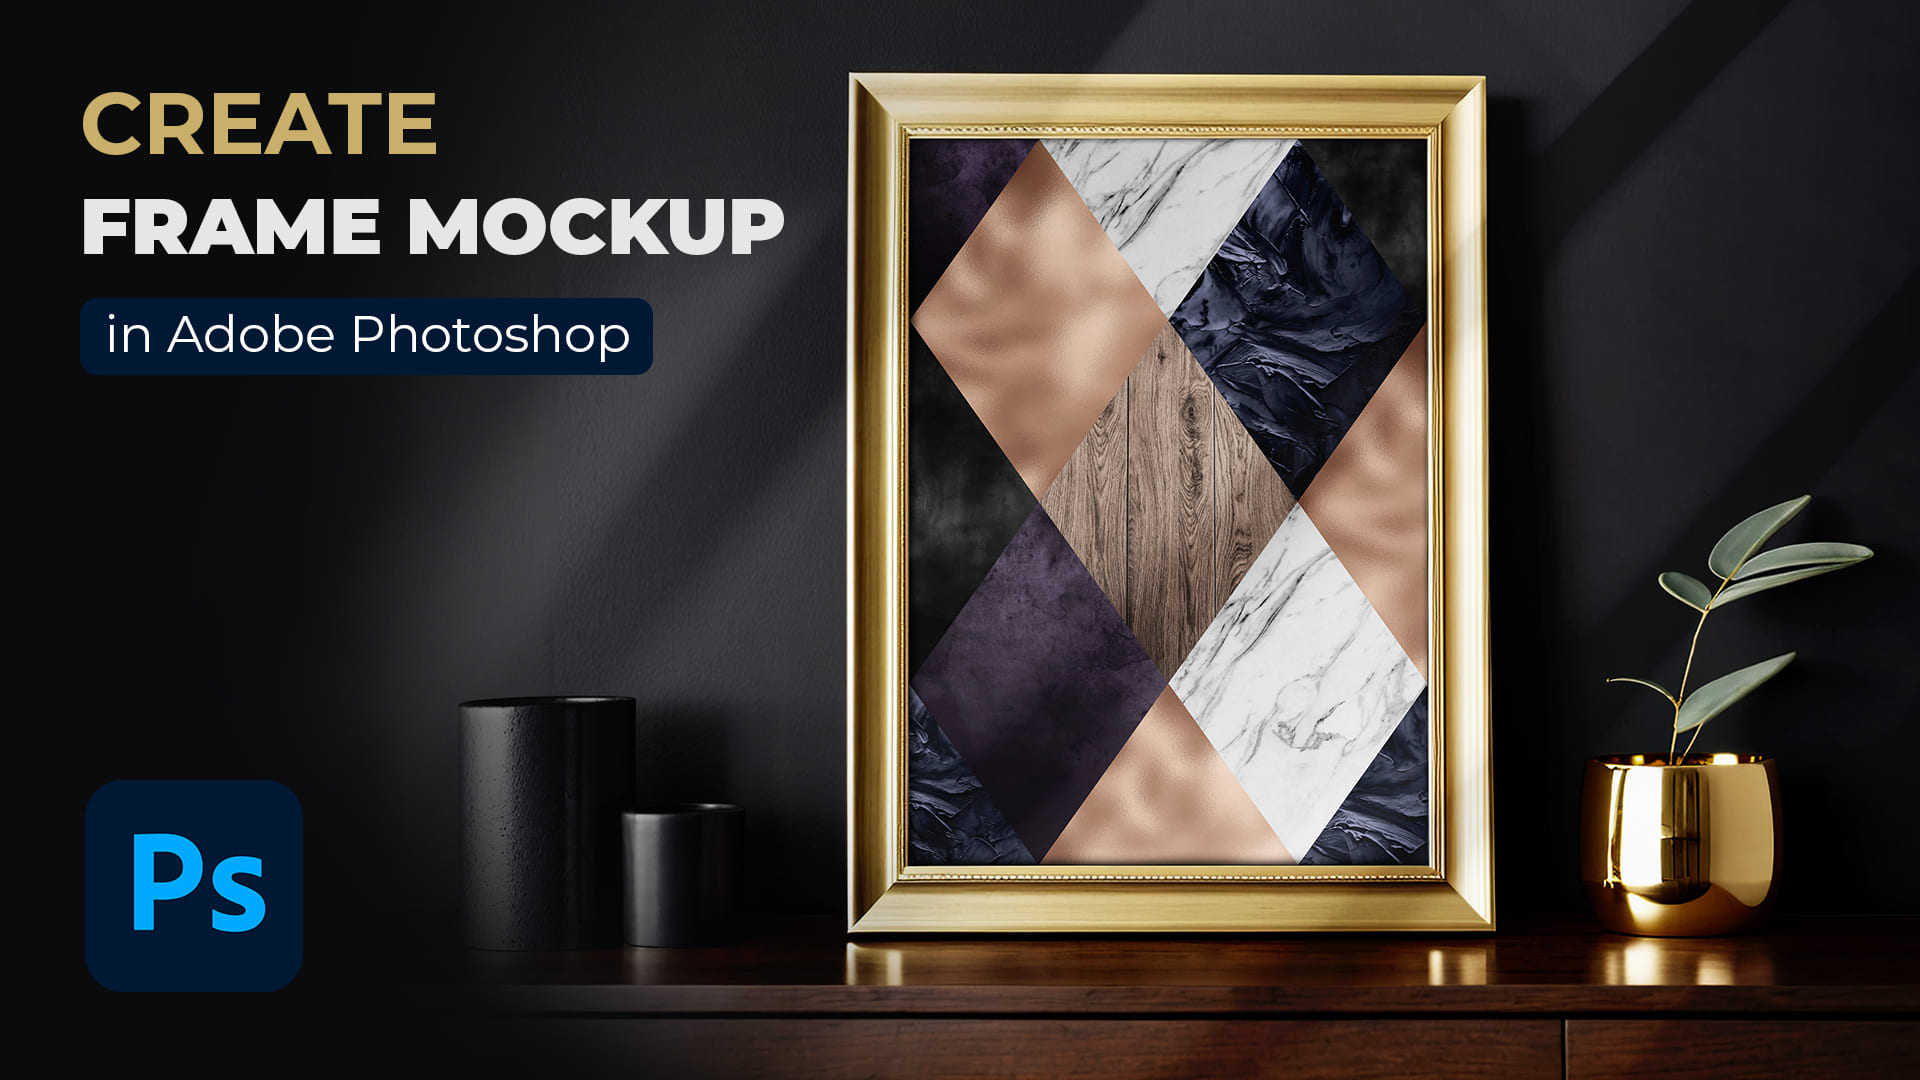 How to Create Frame Mockup in Adobe Photoshop